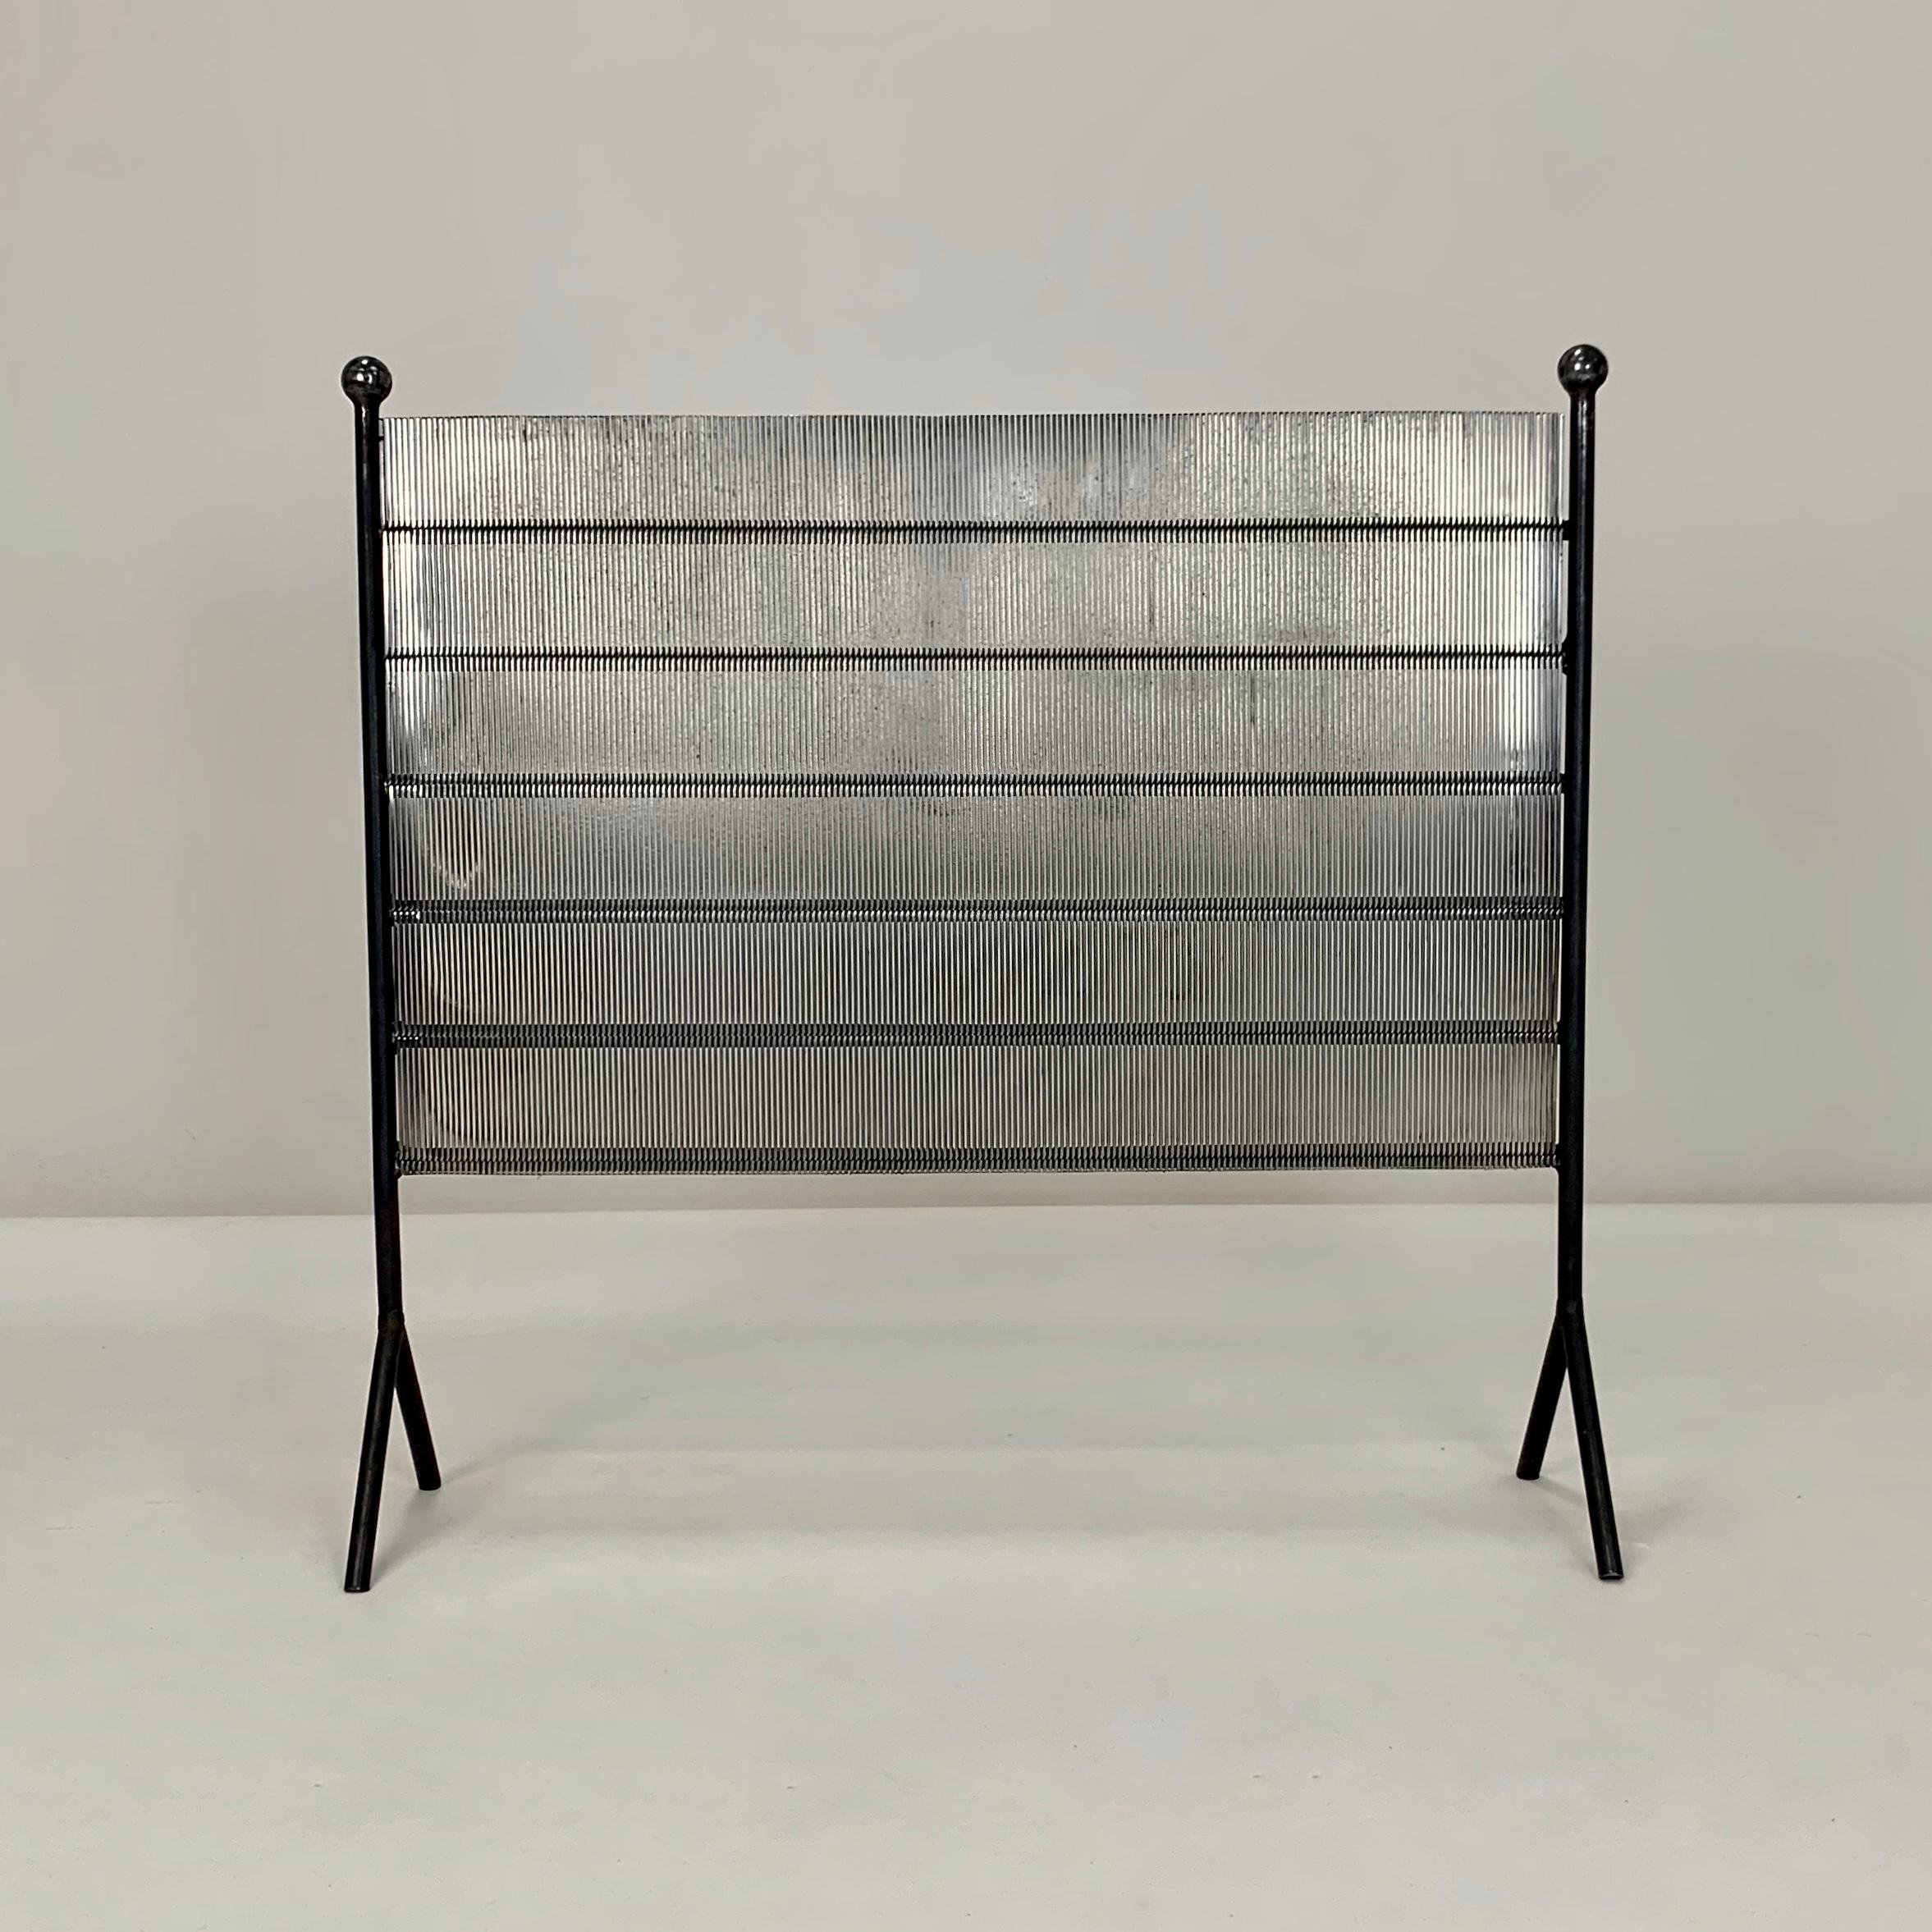 Nice mid-century fire screen, circa 1960, Belgium.
Polished steel. Beautiful metal work.
According to information from the seller, this object was made by a craftsman collaborating with the belgian artist Pol Bury ( optical Art ).
Dimensions: 68 cm